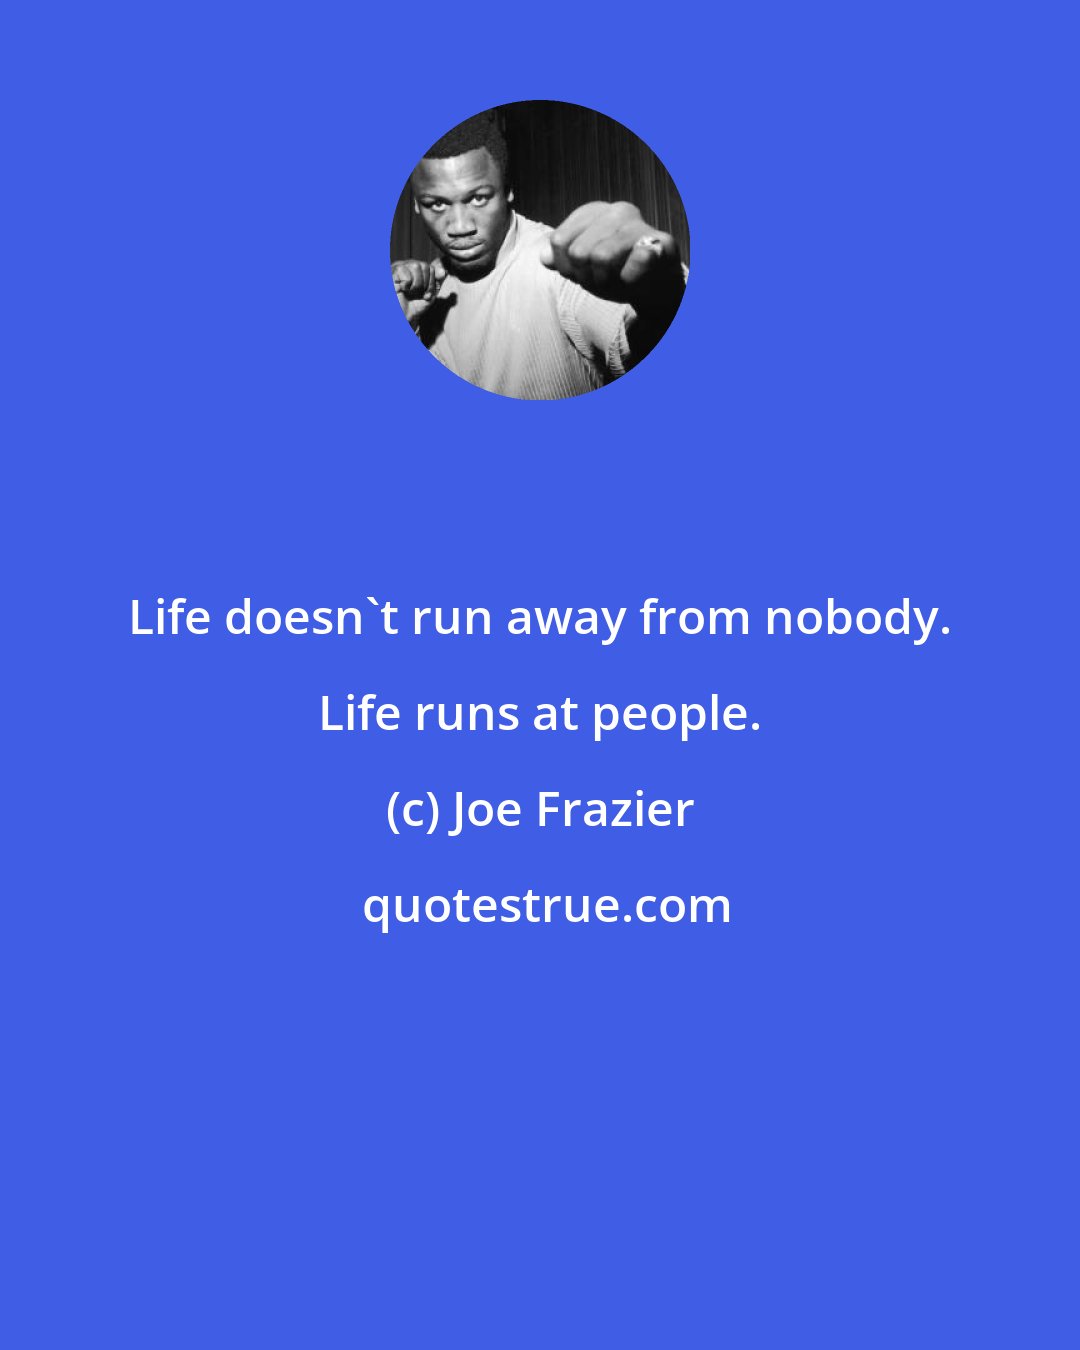 Joe Frazier: Life doesn't run away from nobody. Life runs at people.